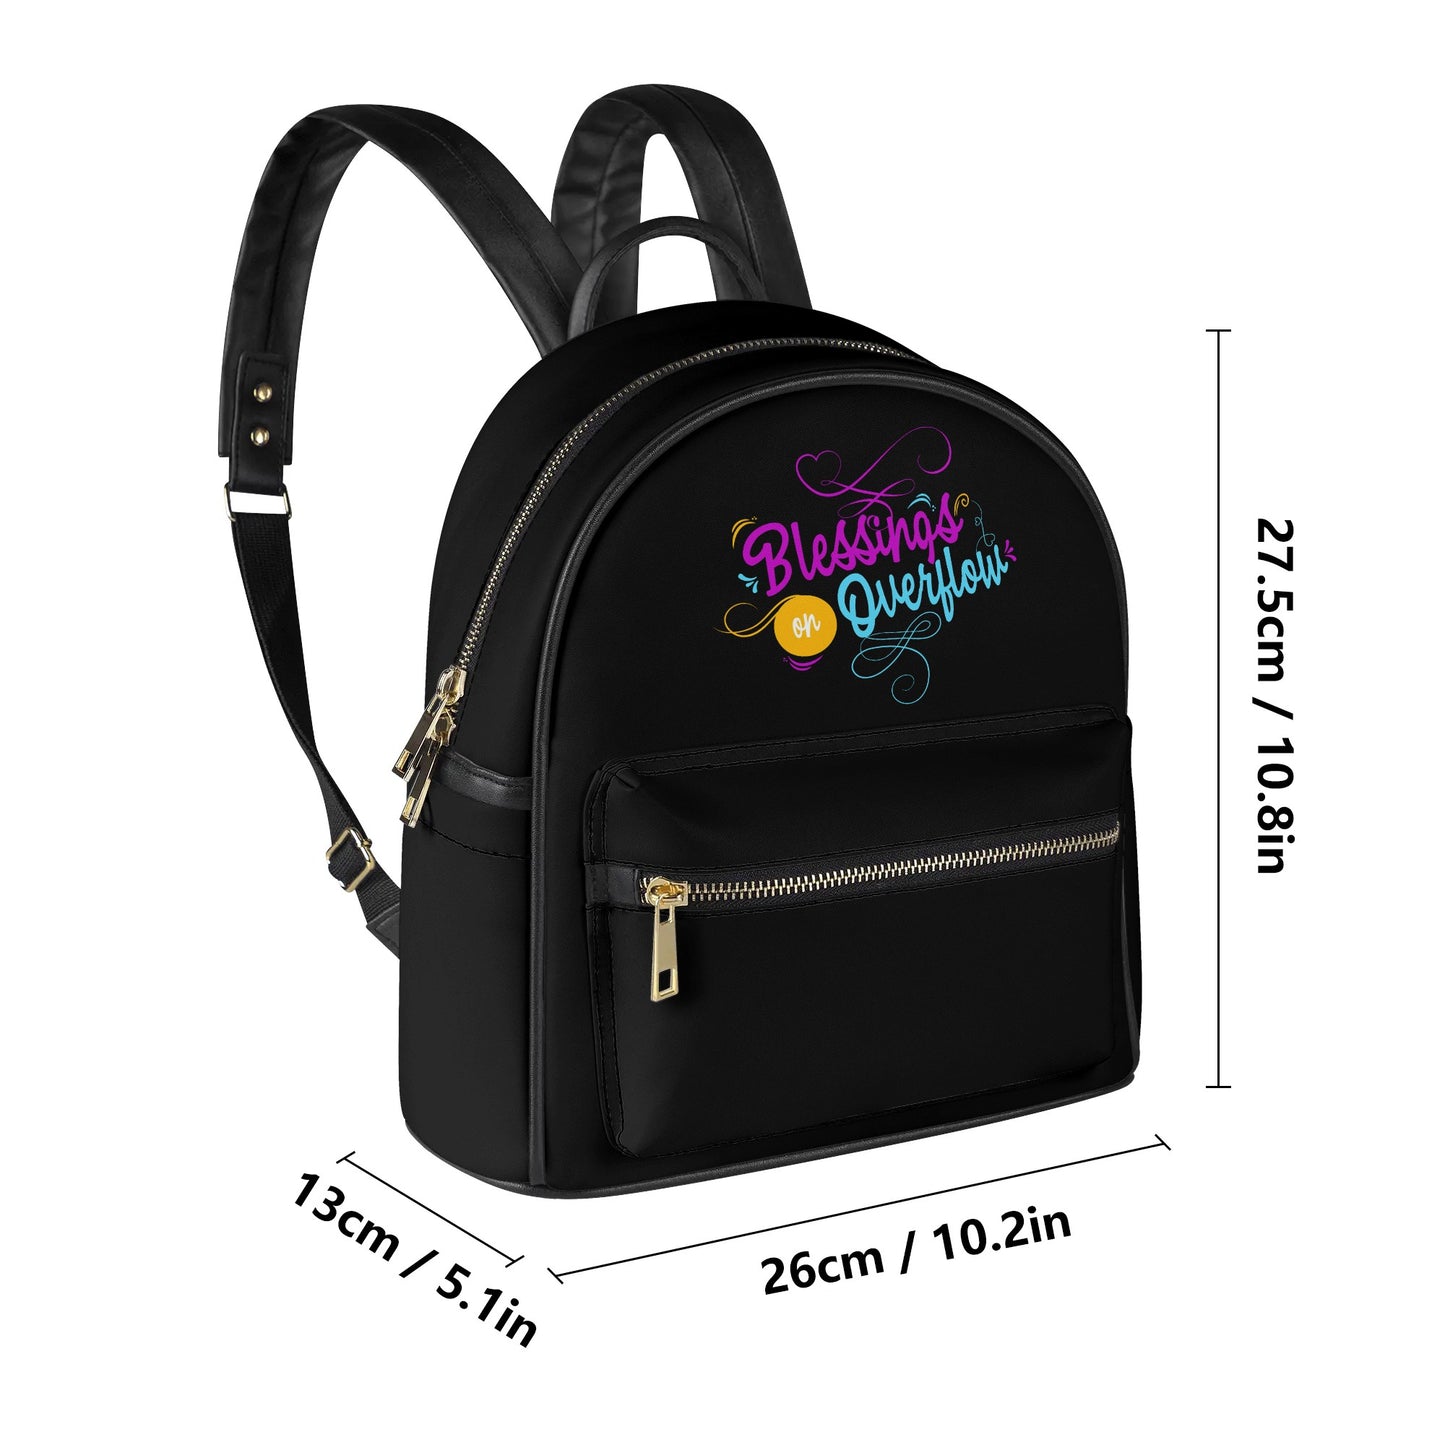 Blessings on Overflow Christian Casual PU Leather Backpack popcustoms